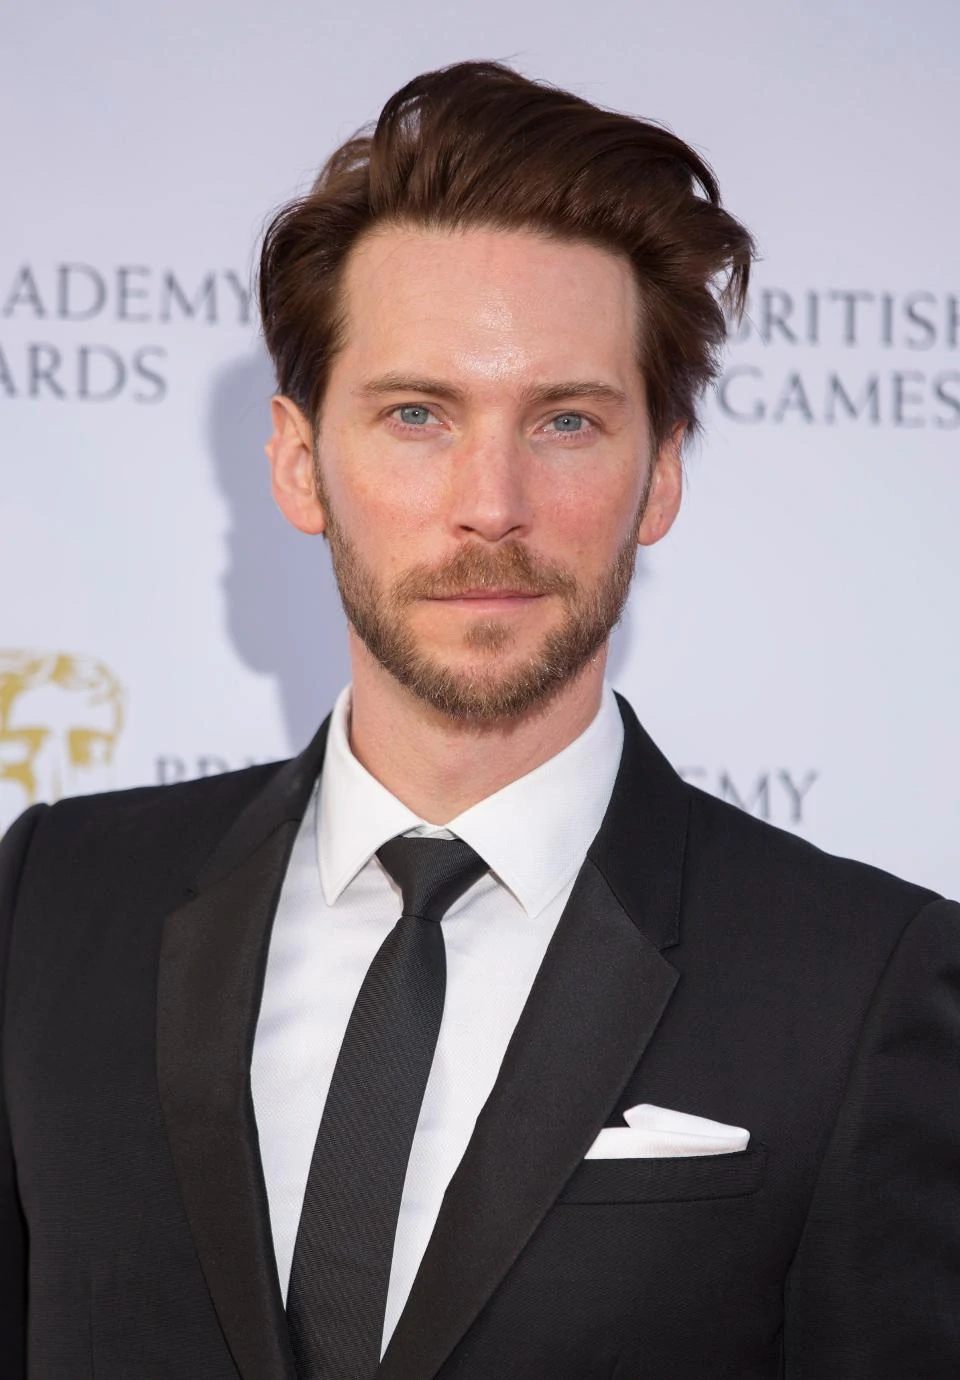 The Best Characters Voiced By Troy Baker in Games – GameSpew